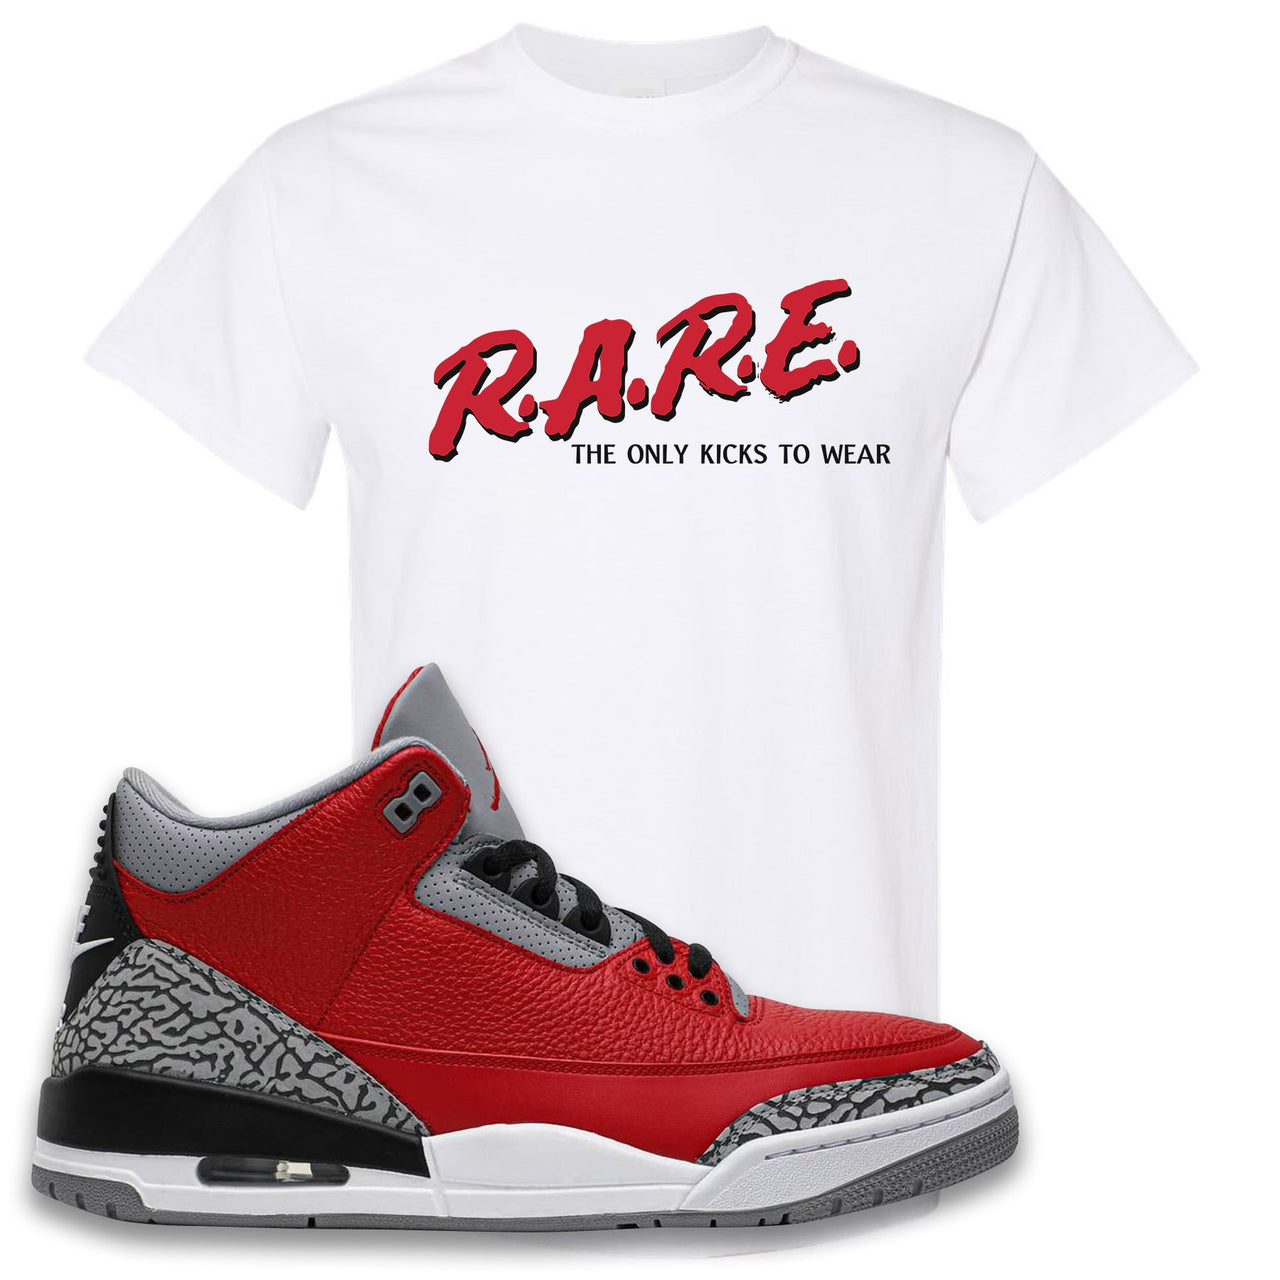 Jordan 3 Red Cement Chicago All-Star Sneaker White T Shirt | Tees to match Jordan 3 All Star Red Cement Shoes | Rare